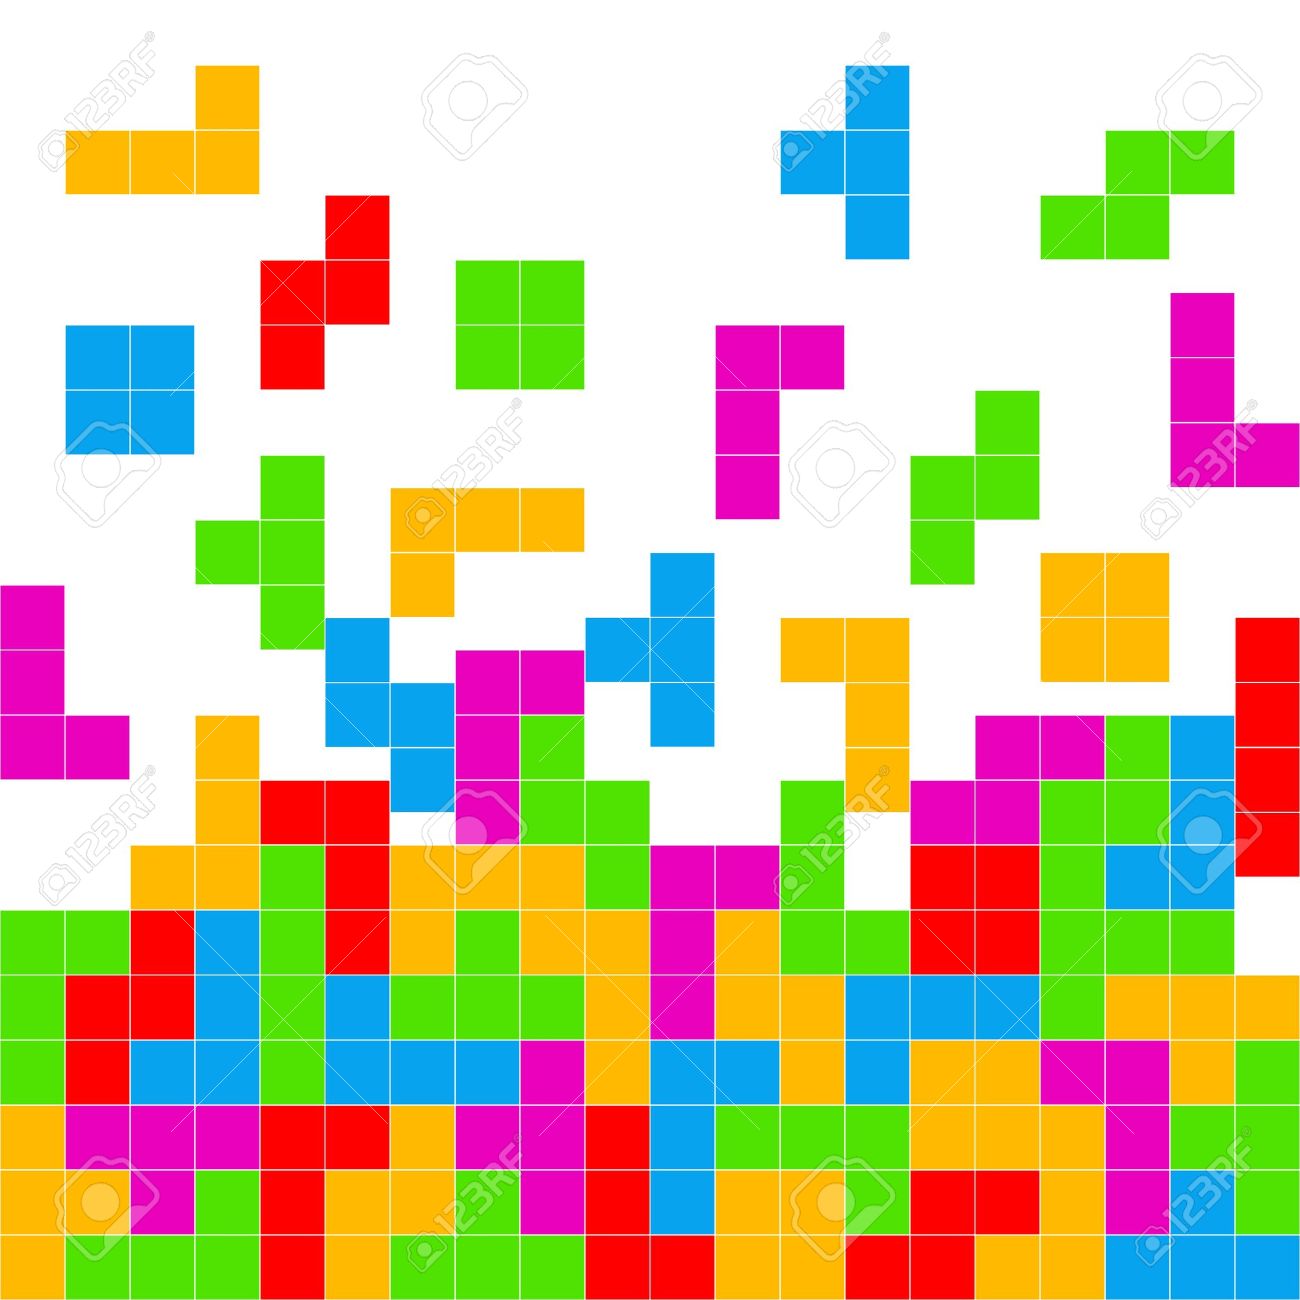 Tetris Game Playing Background Stock Photo Picture And Royalty